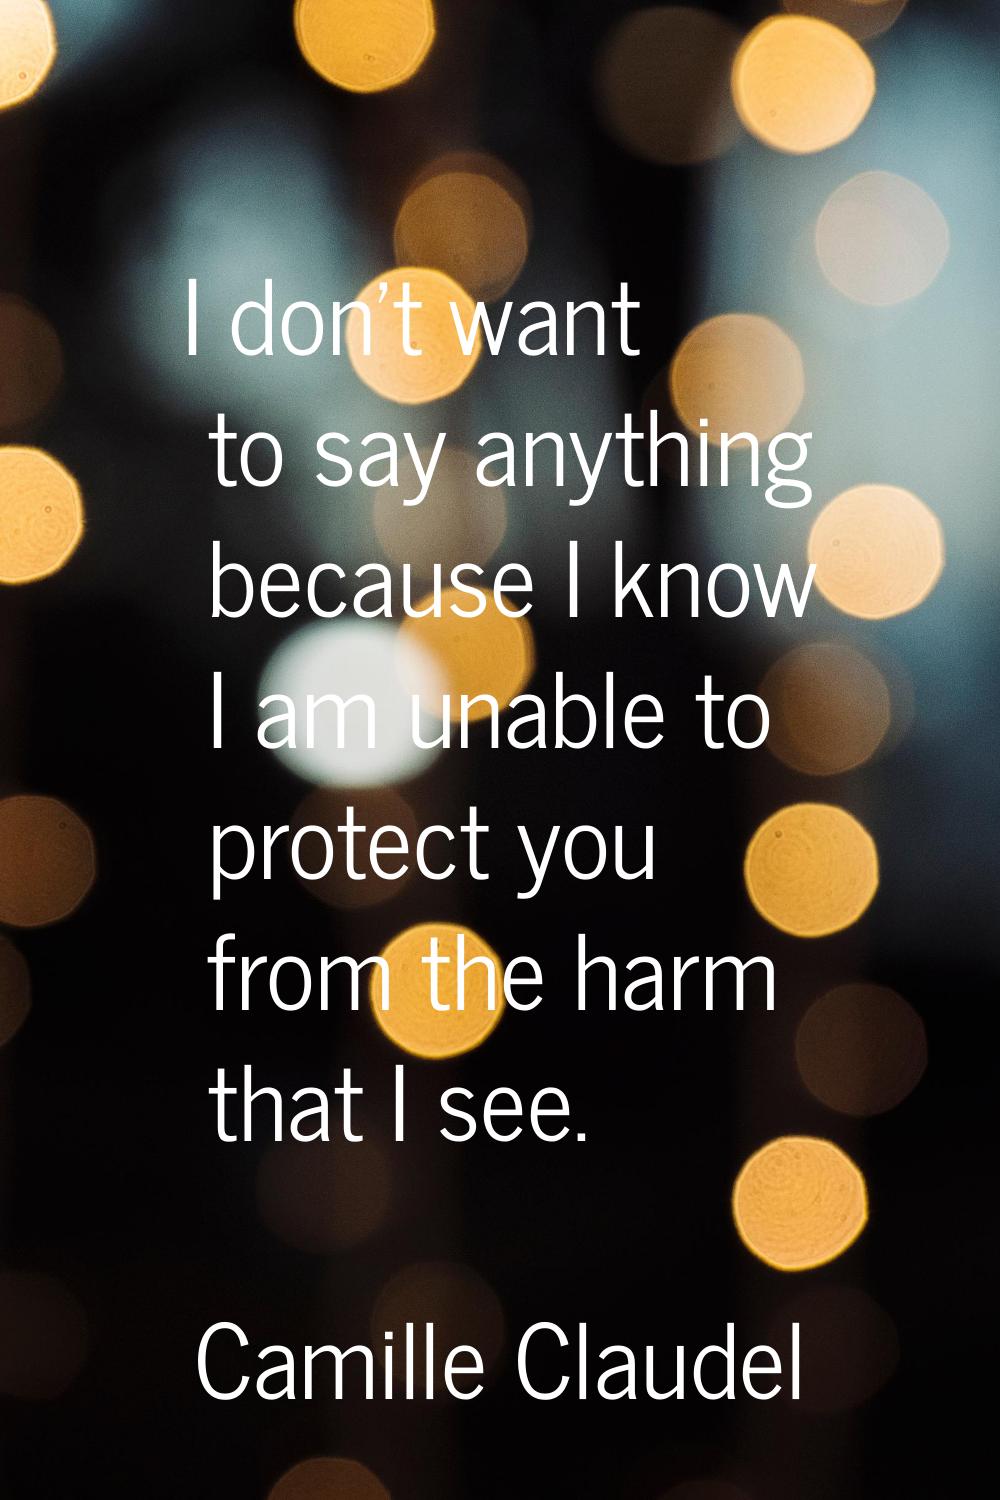 I don't want to say anything because I know I am unable to protect you from the harm that I see.